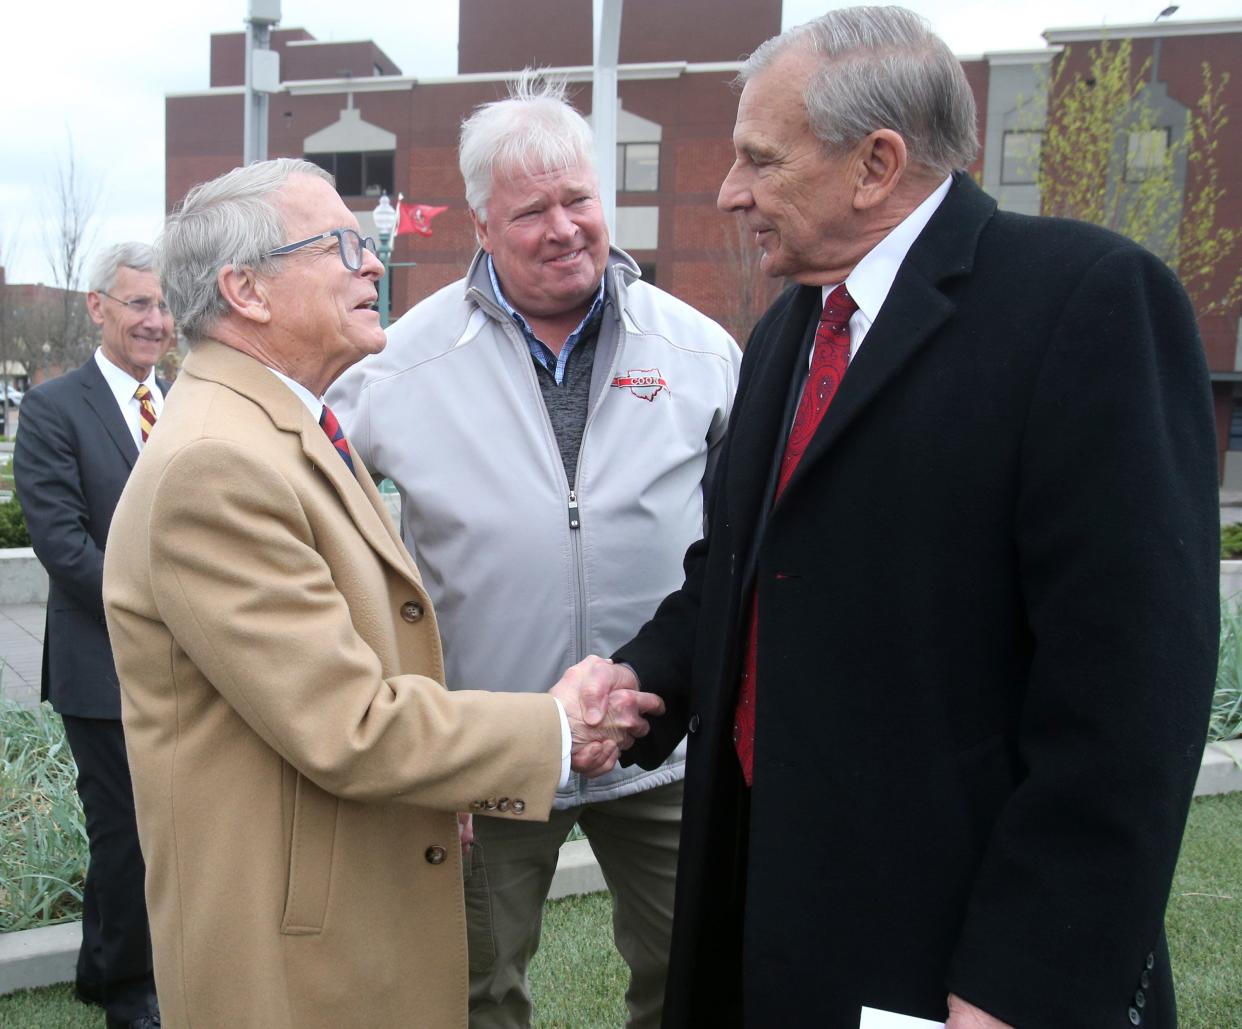 Gov. Mkle DeWine, left, shakes hands with Canton Mayor Thomas M. Bernabei after arriving at Centennial Plaza in Canton in April 2022.